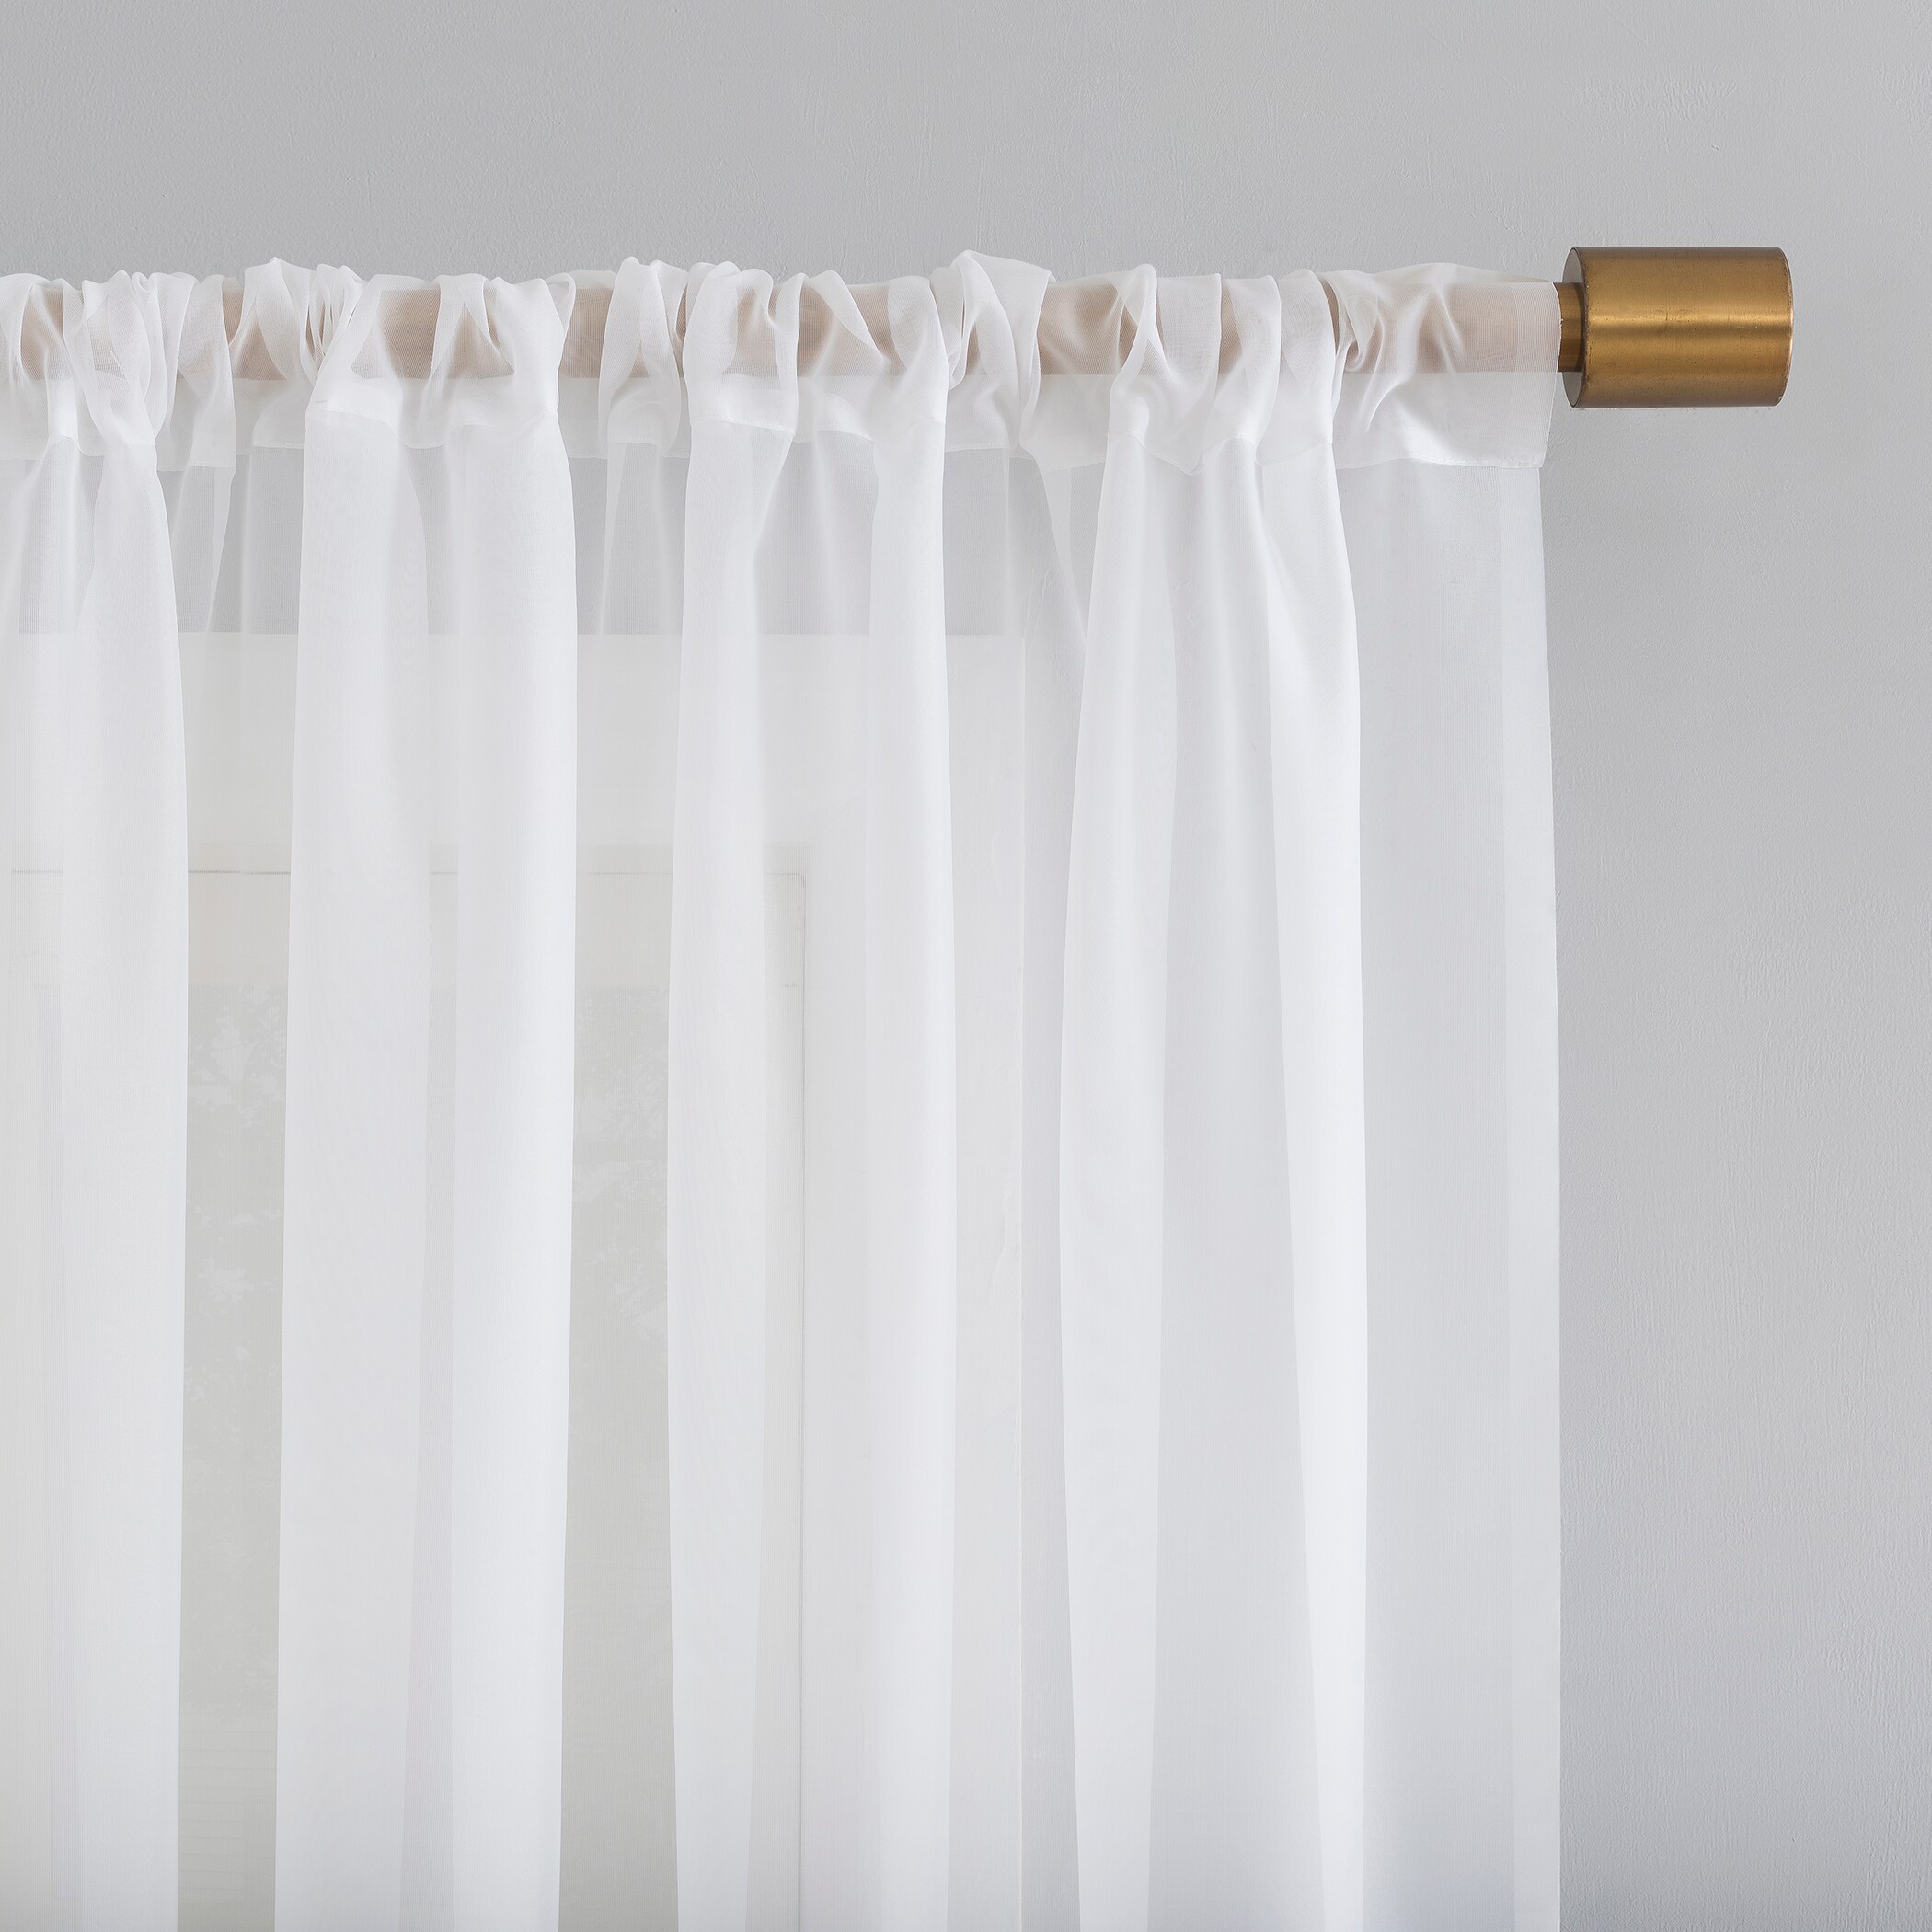 No. 918 63-in White Sheer Rod Pocket Single Curtain Panel in the ...